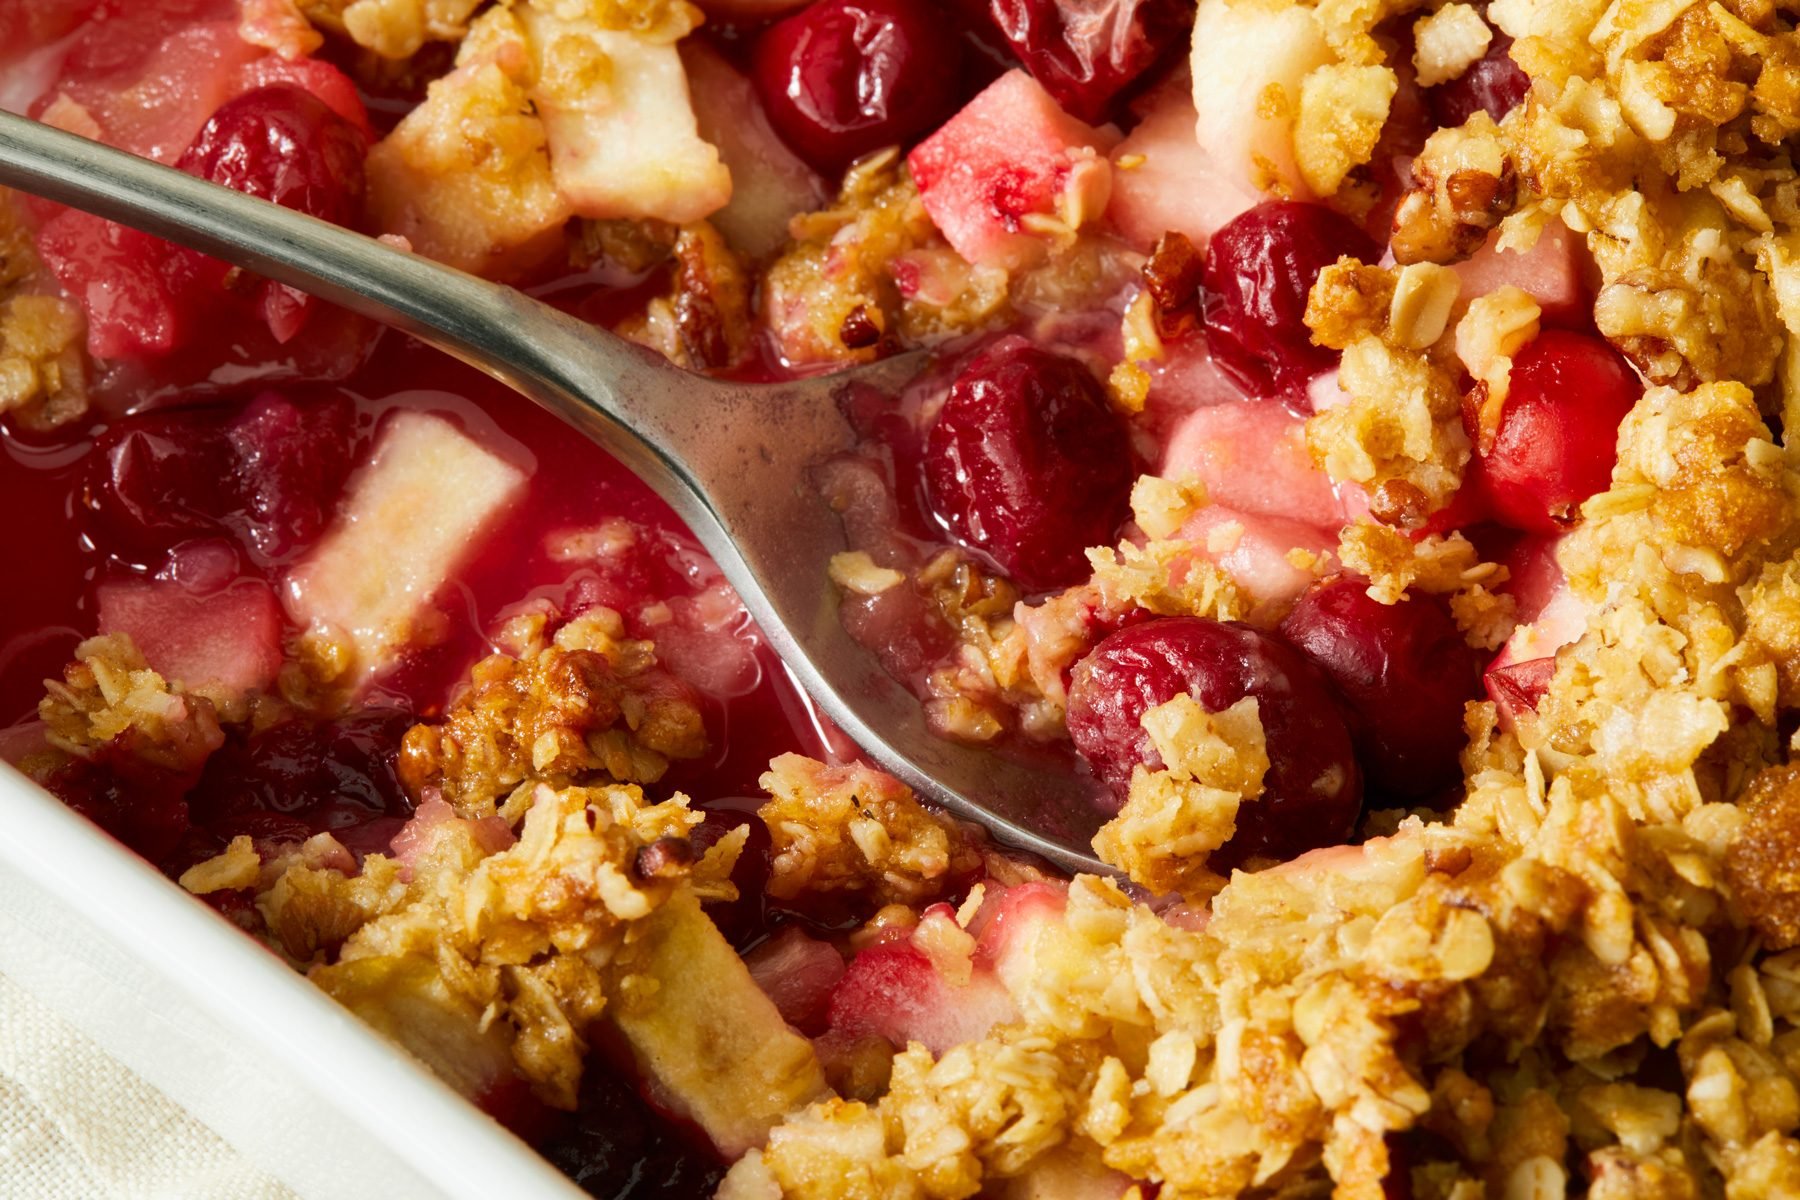 A delicious Cranberry Apple Crisp dessert with a golden crumb topping